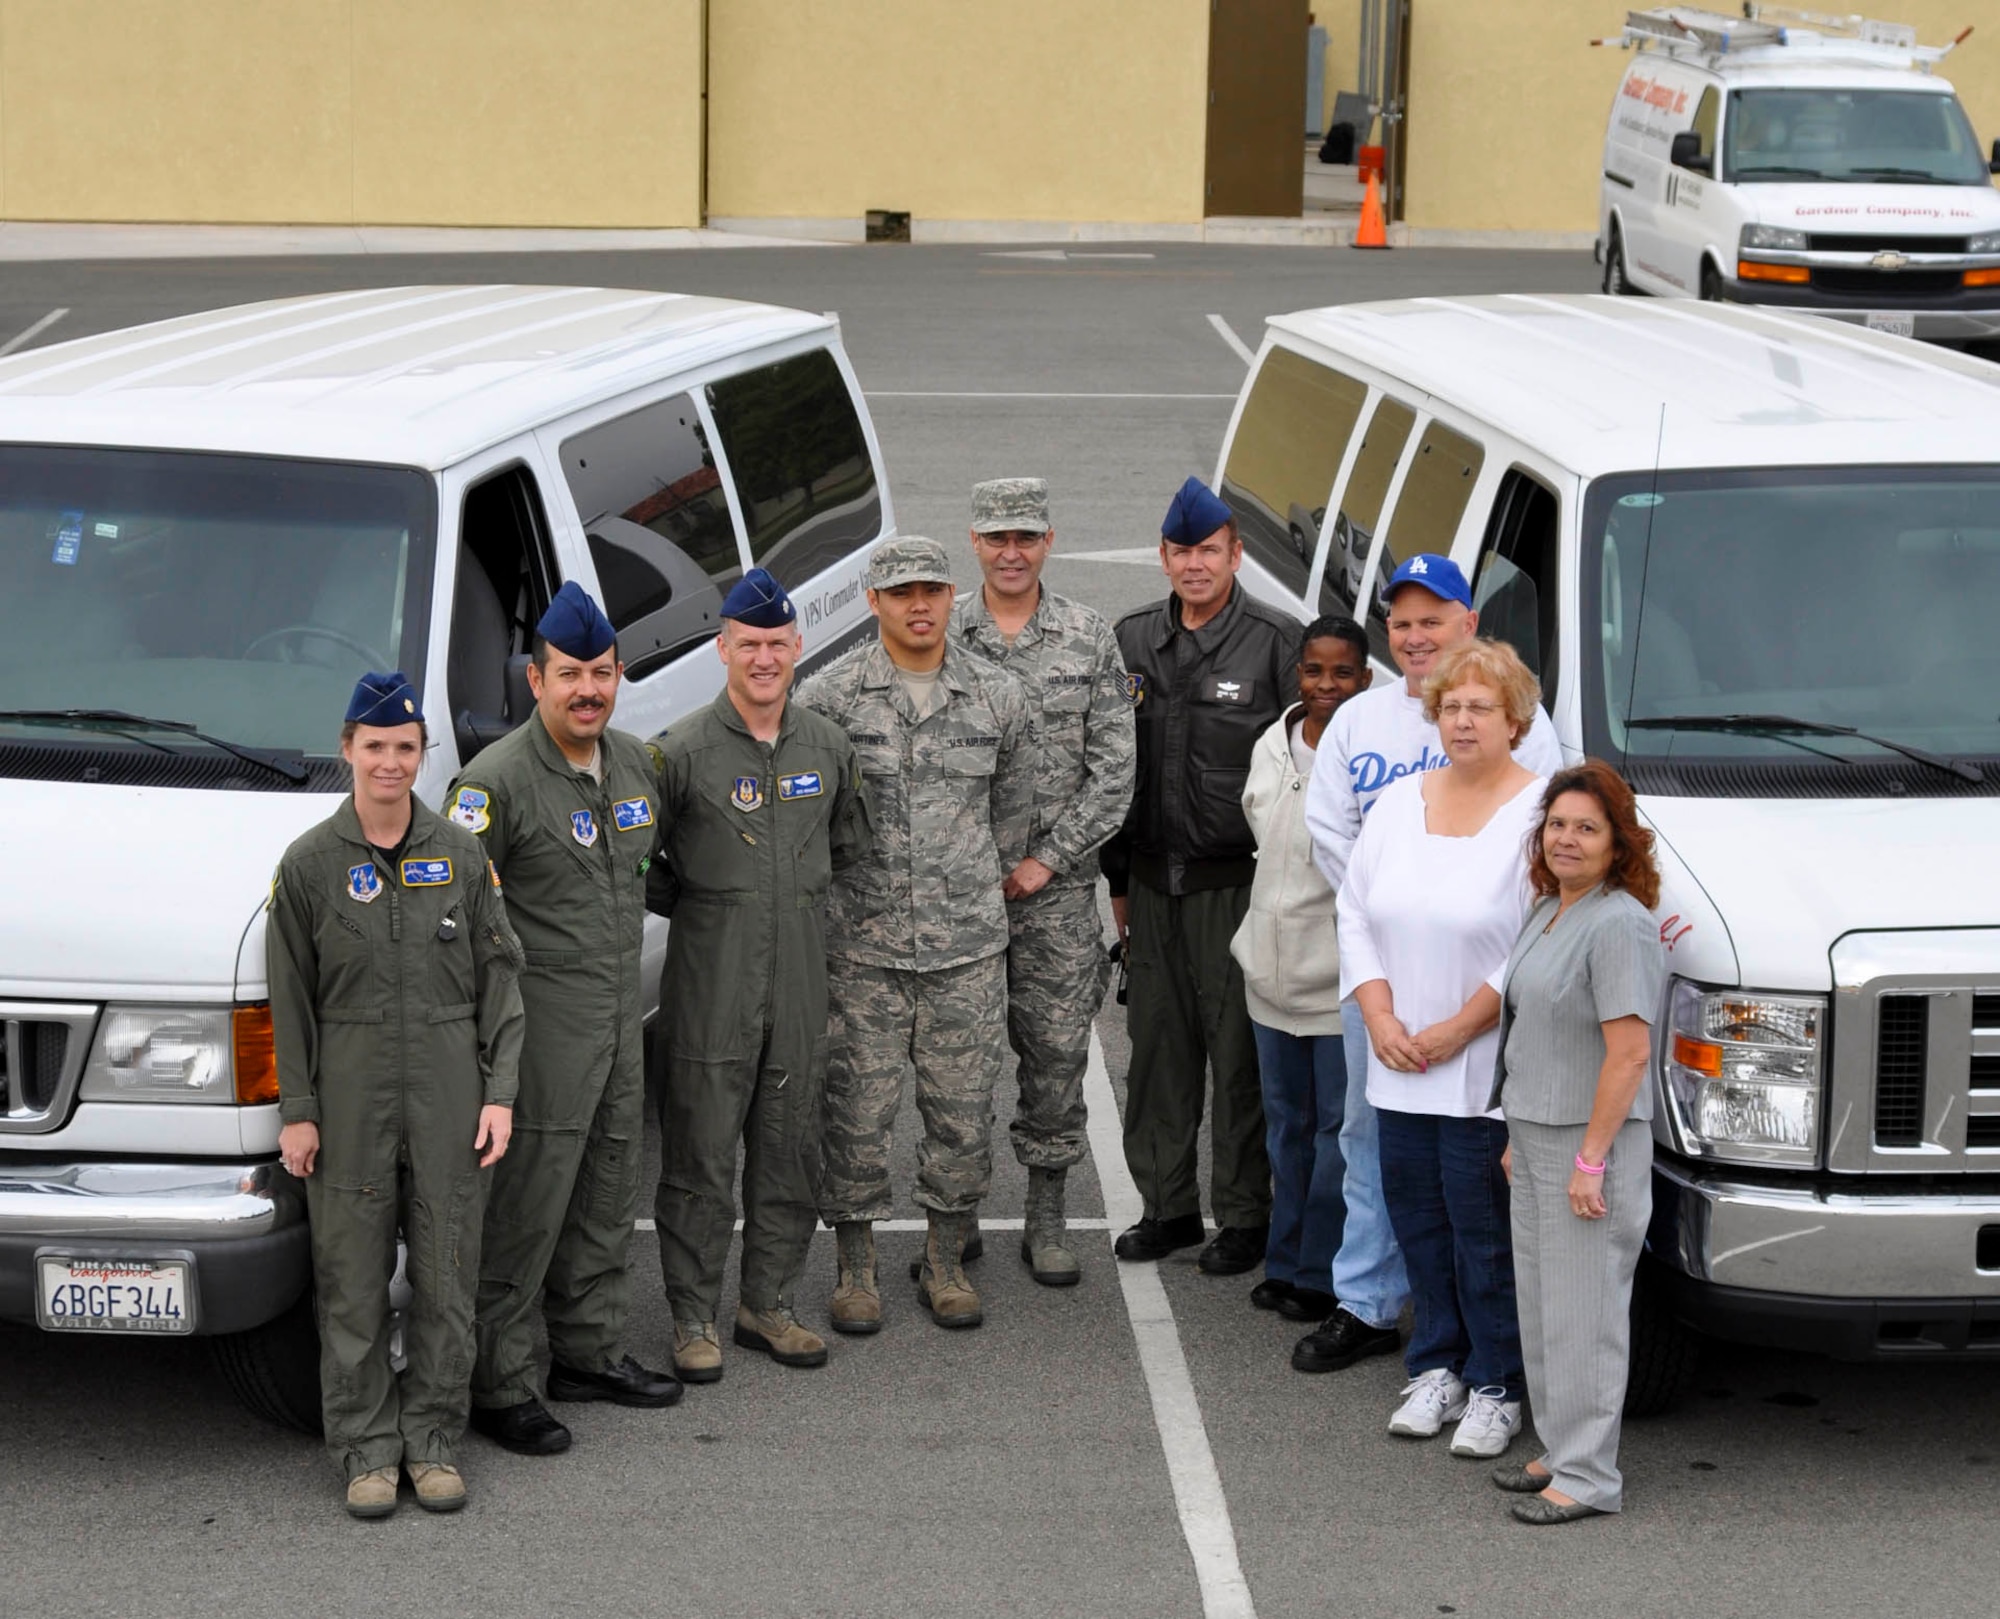 A group of vanpoolers pose with their rideshare vans at March Air Reserve Base, Calif., April 18, 2011.  More than 120 March service members and civilian employees ride in vans to work each day.  (U.S. Air Force photo/ Megan Just)